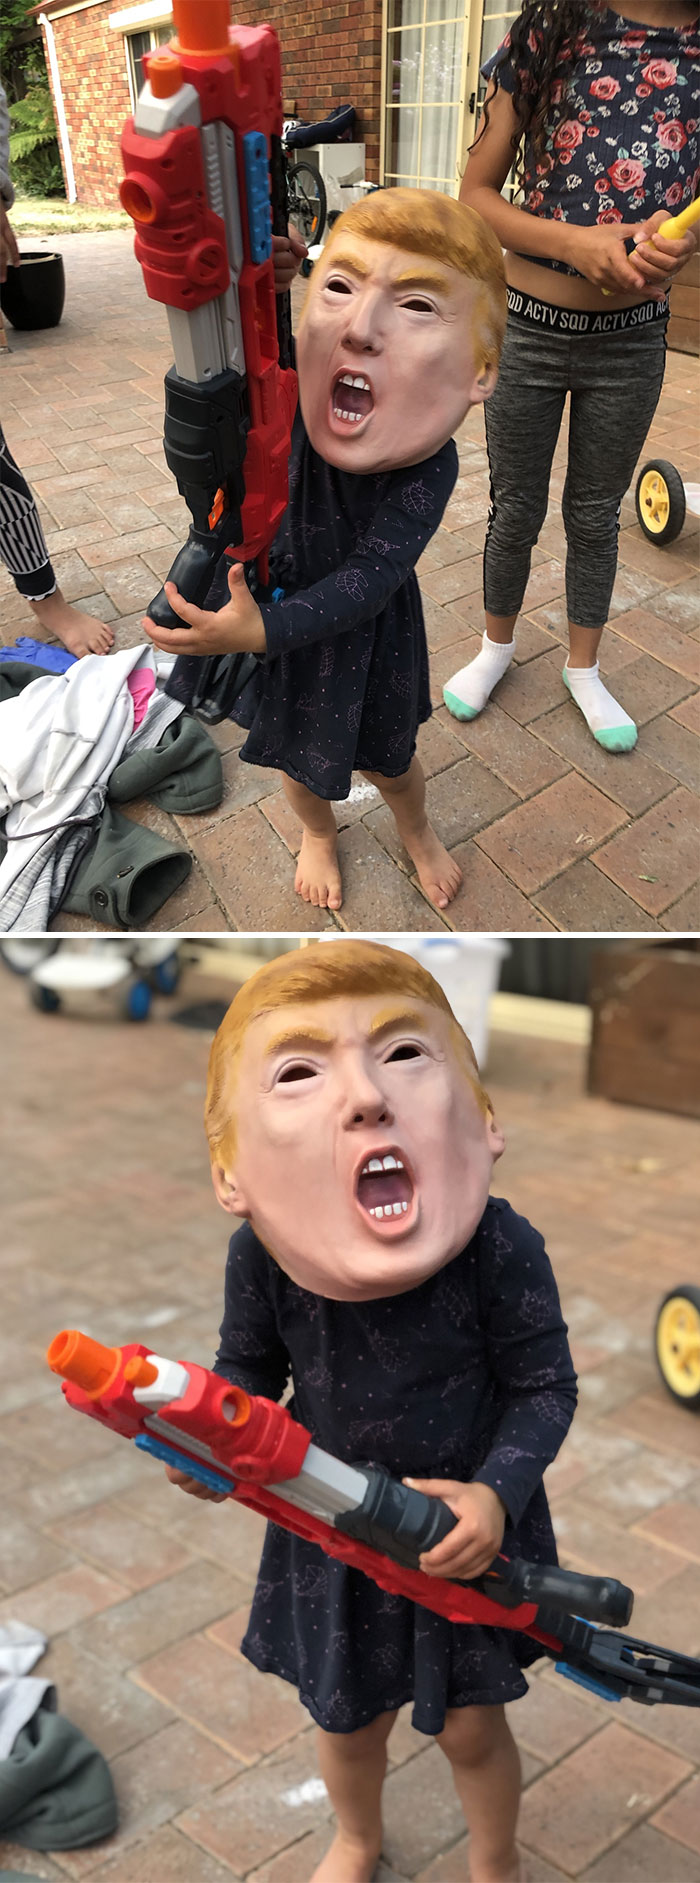 Got A $1 Trump Mask At A Yard Sale In Australia. My God I Have Never Got Such Comedic Value From A Sale